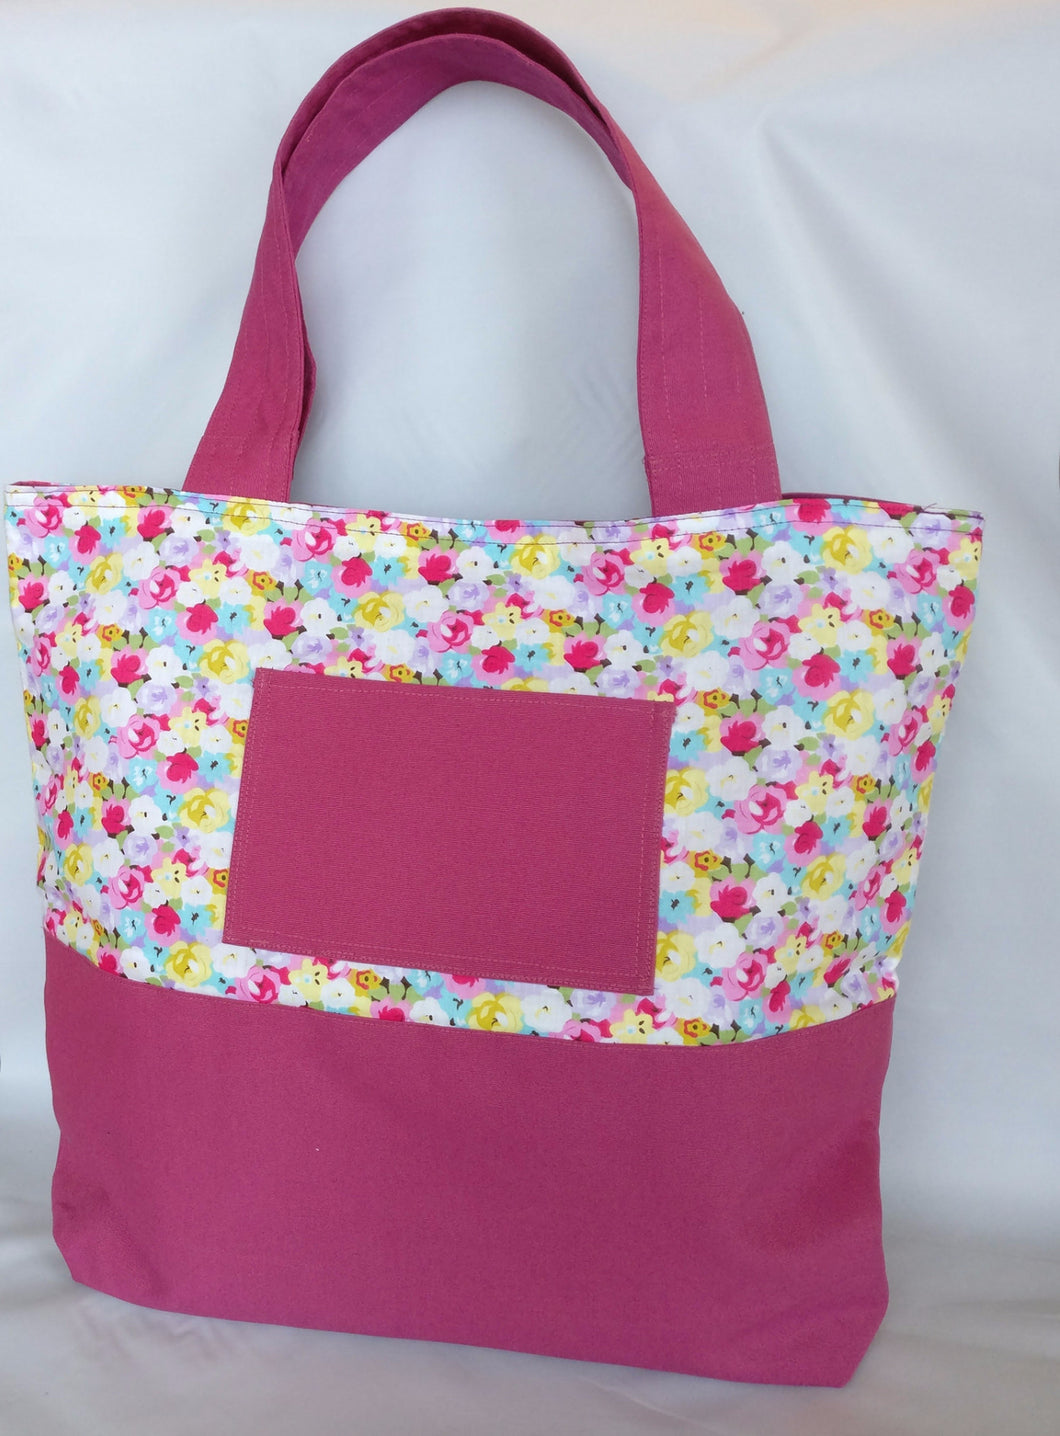 Handmade floral and hot pink, Tote bag with pockets